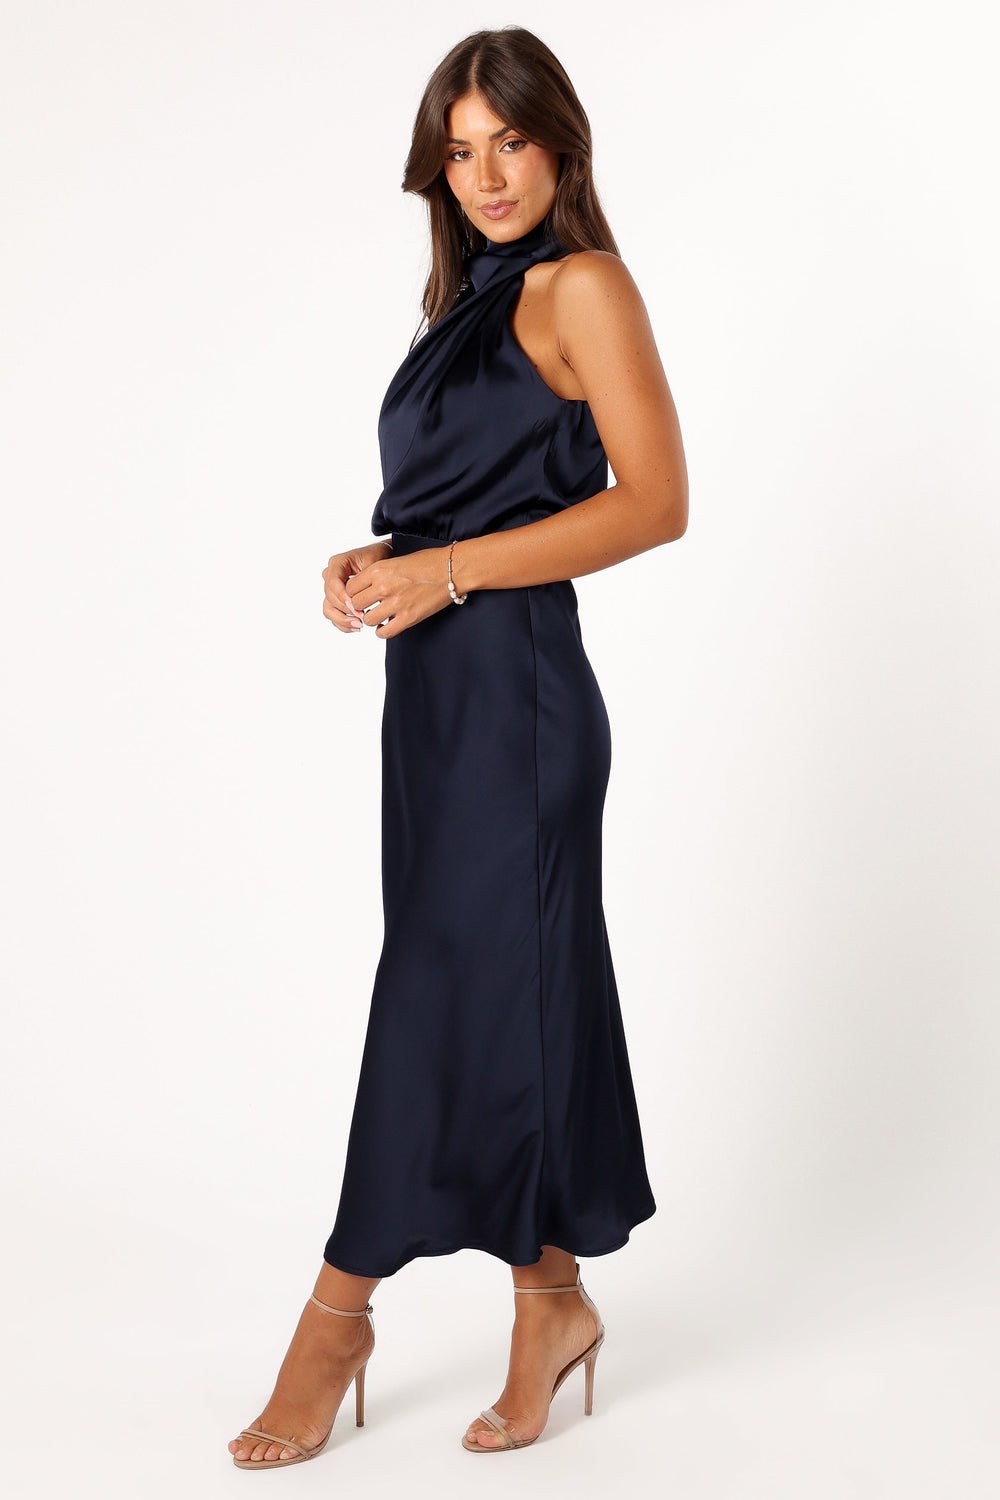 Petal and Pup USA DRESSES Anabelle Halter Neck Midi Dress - Navy